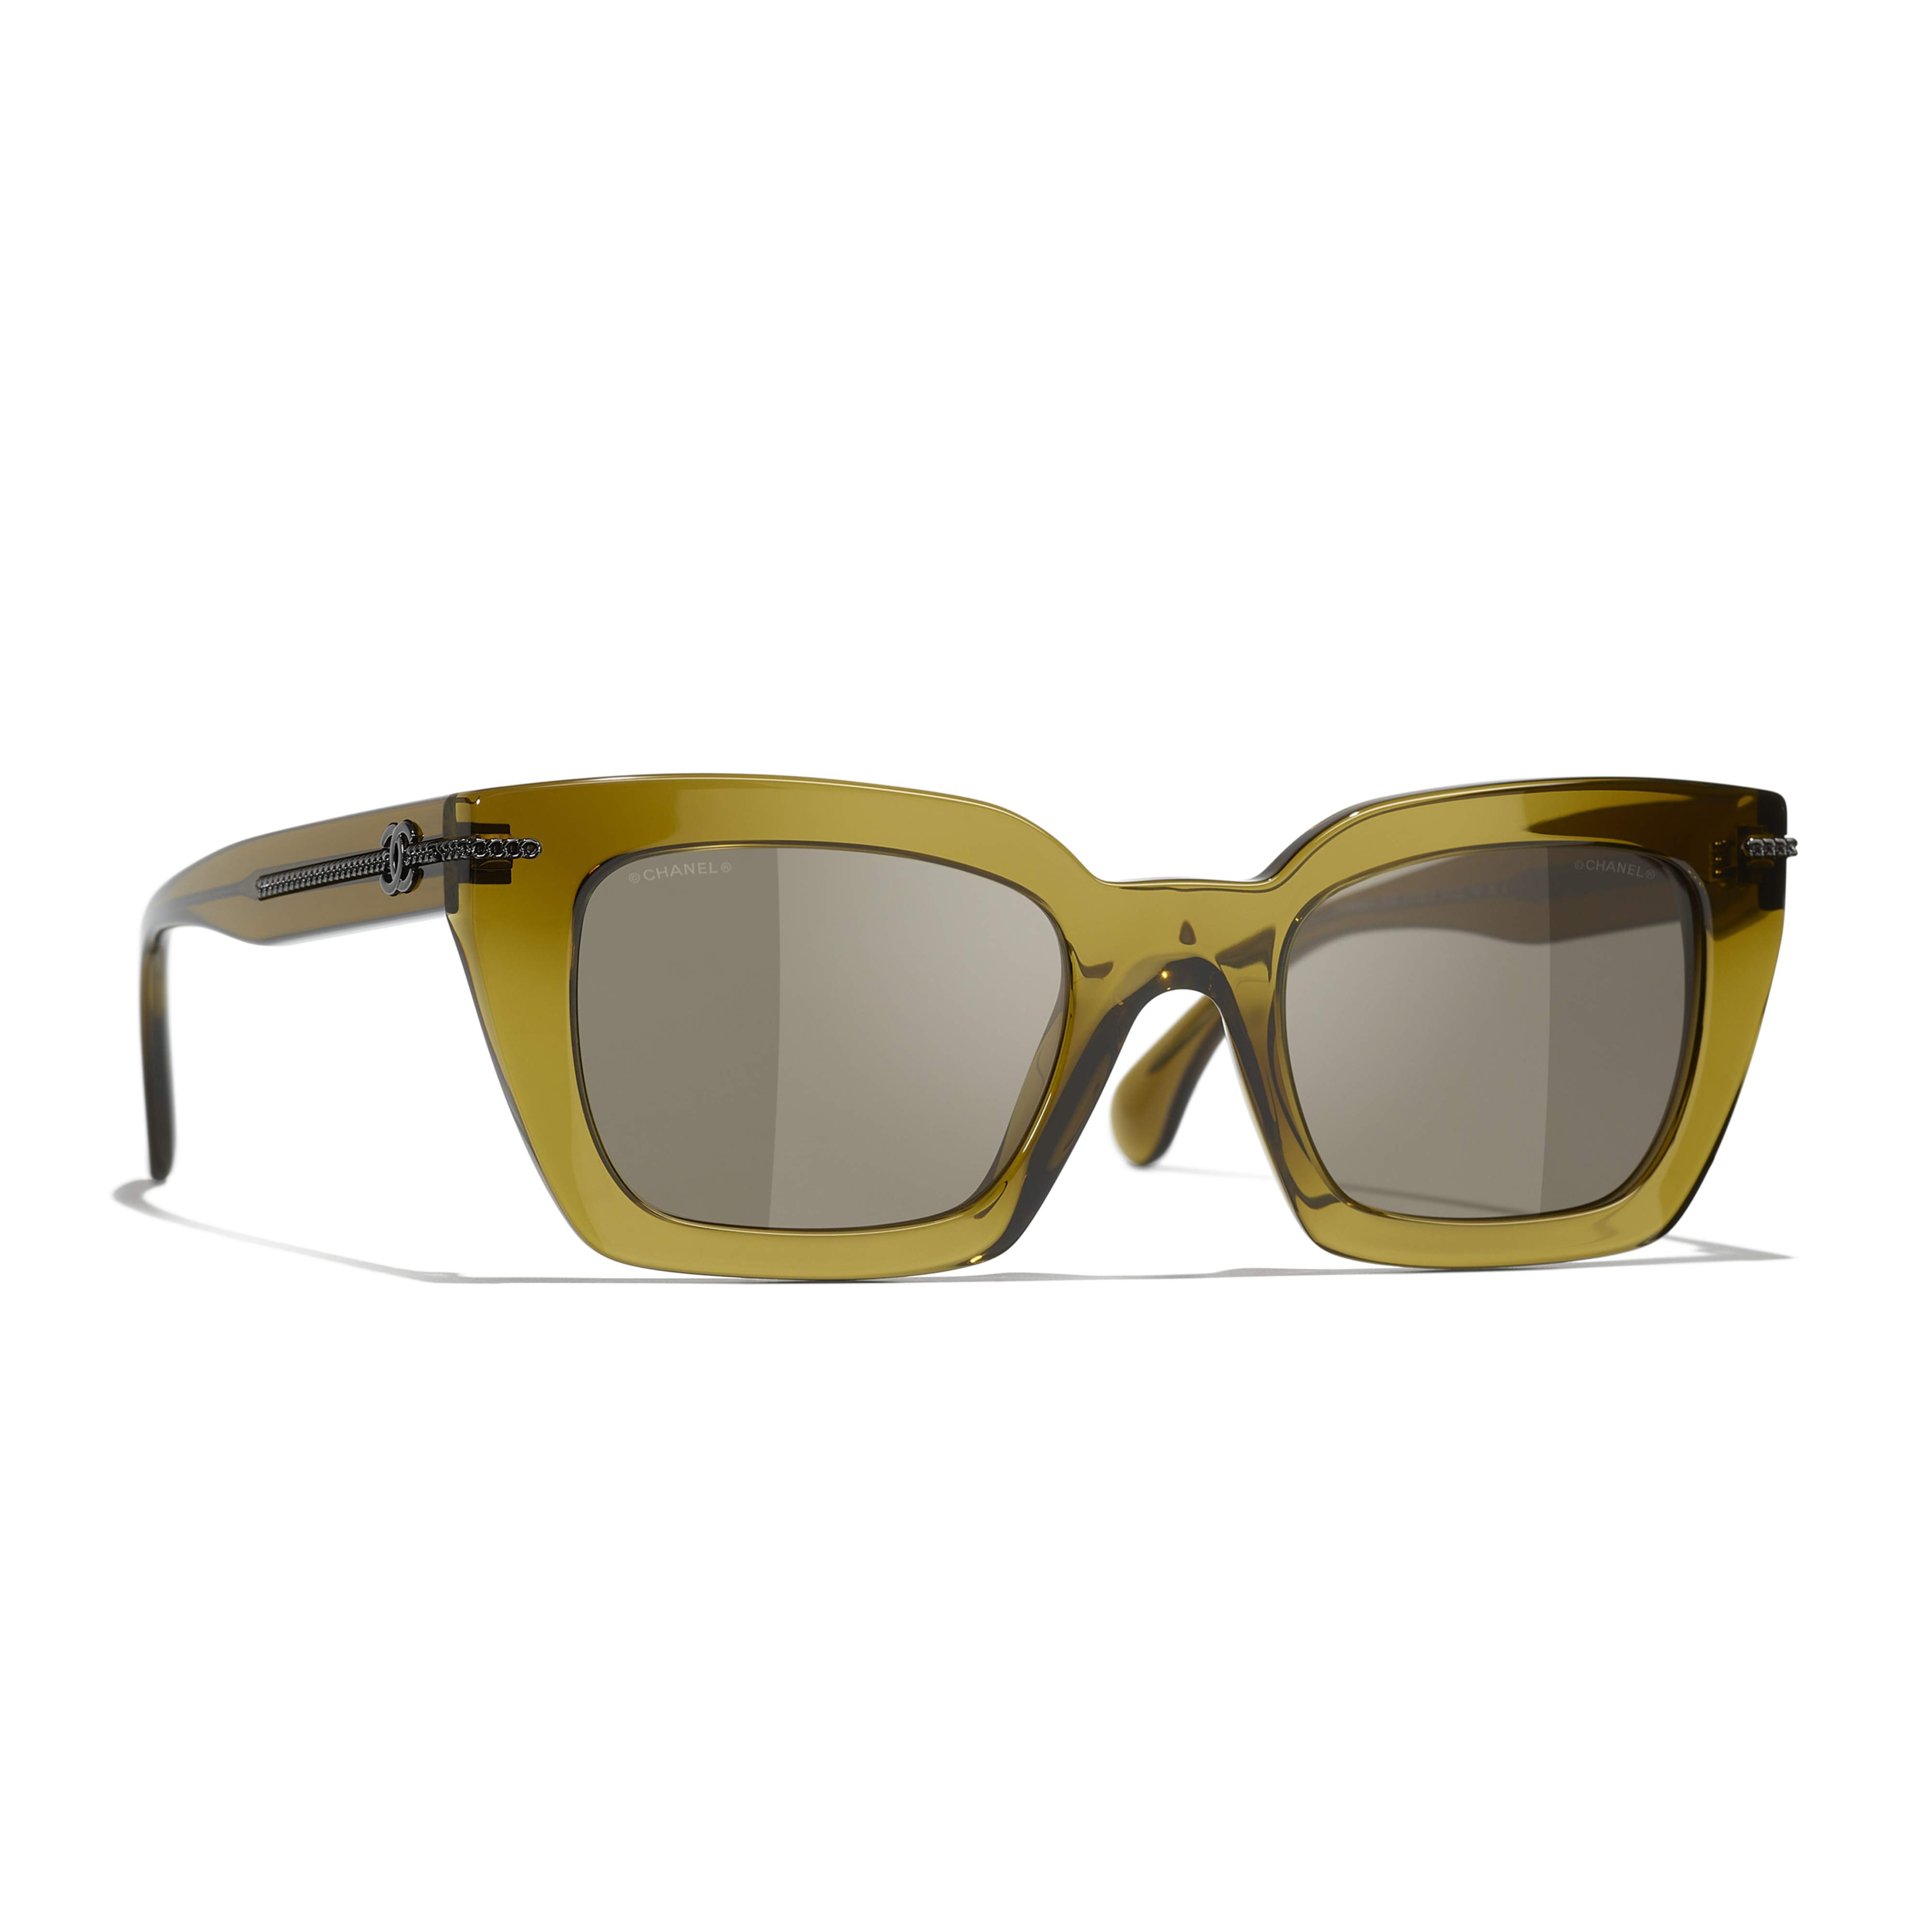 Sunglasses CHANEL CH5509 1742/3 51-22 Olive in stock | Price 262 